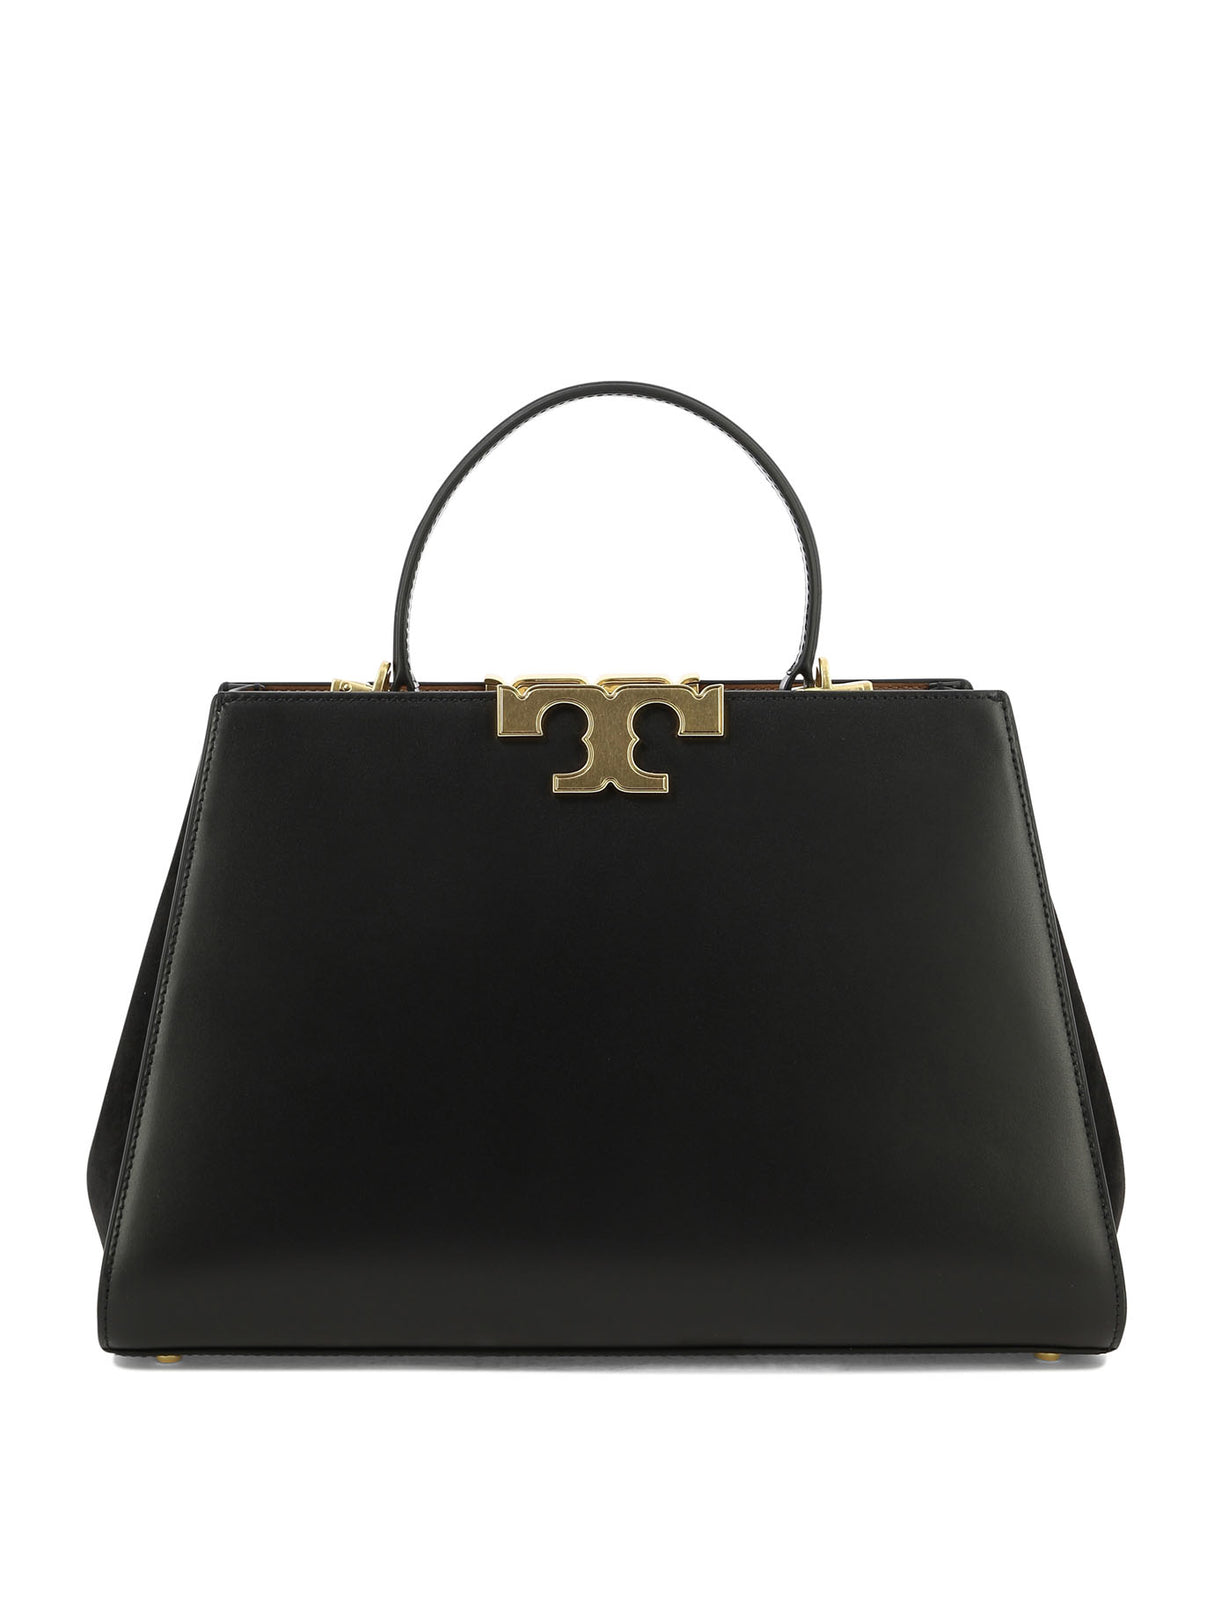 TORY BURCH Elegant Black Leather Crossbody Bag for Women from SS24 Collection